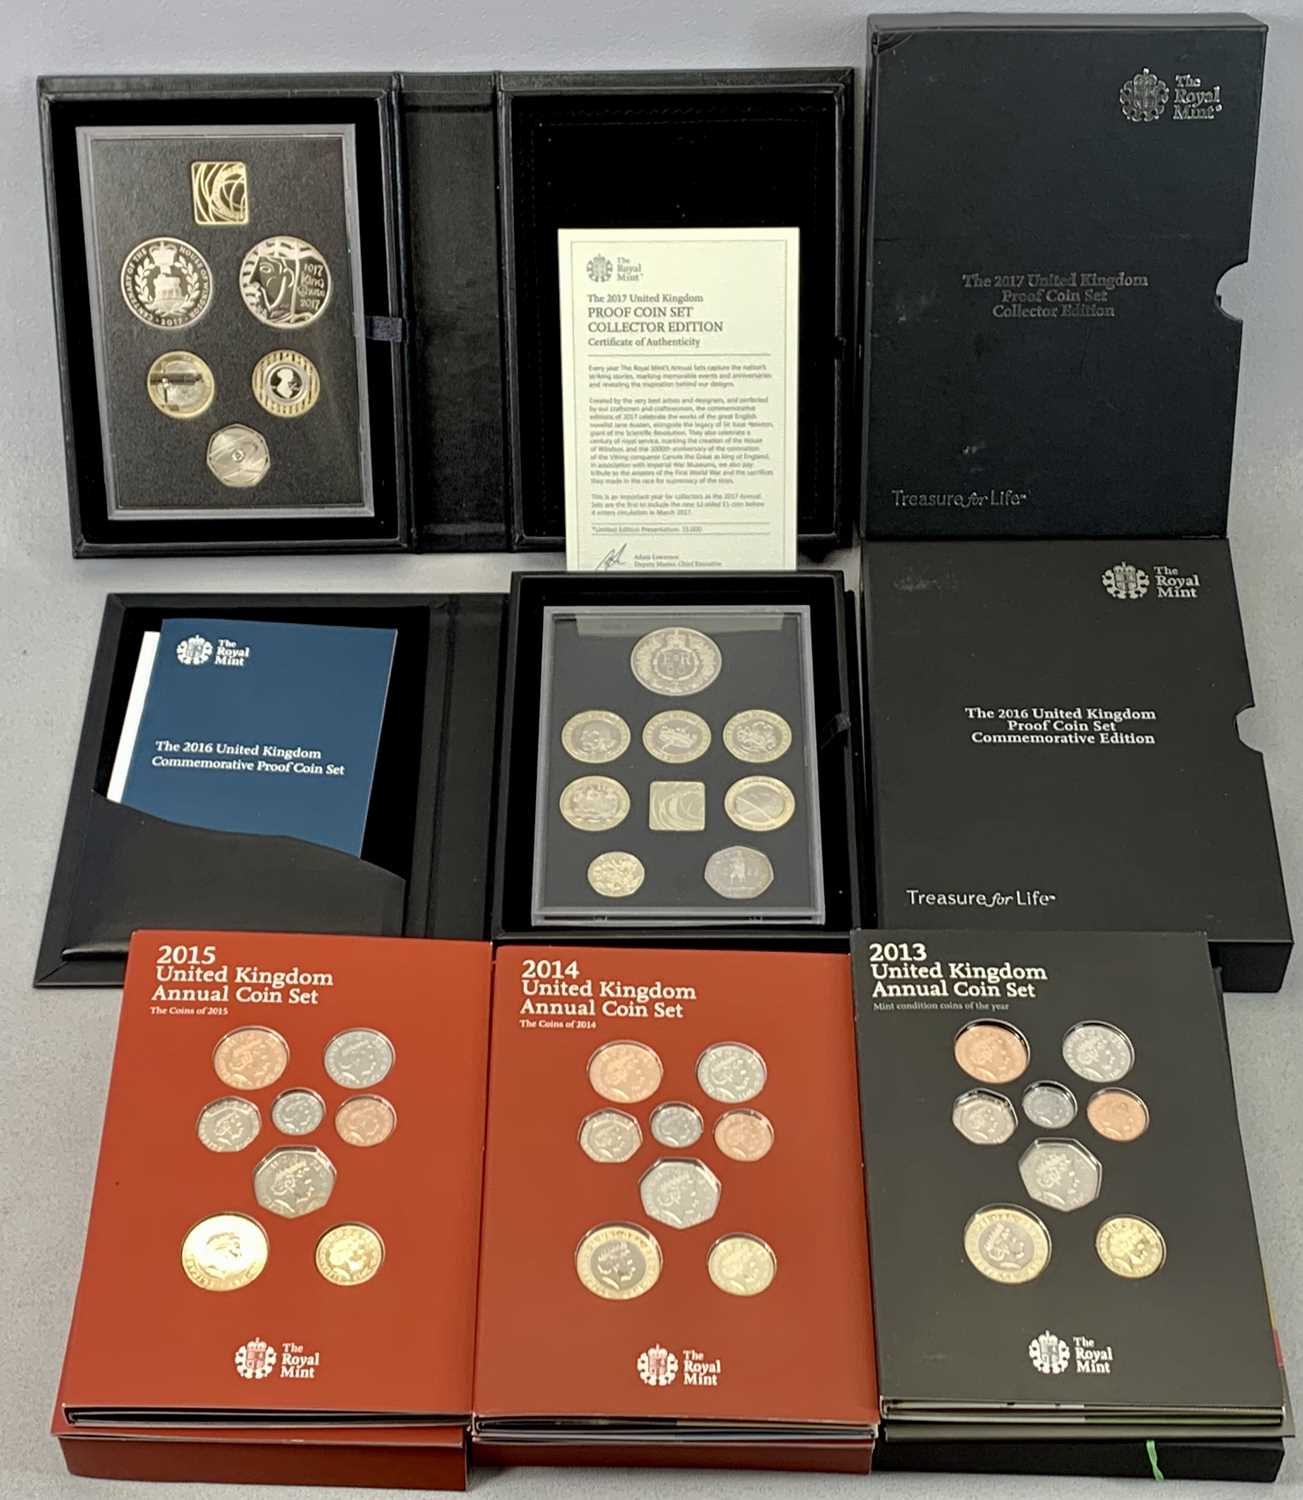 ROYAL MINT ANNUAL & PROOF COIN SETS x 5, 2013 set of 15 coins, 2014 set of 14 coins, 2015 set of